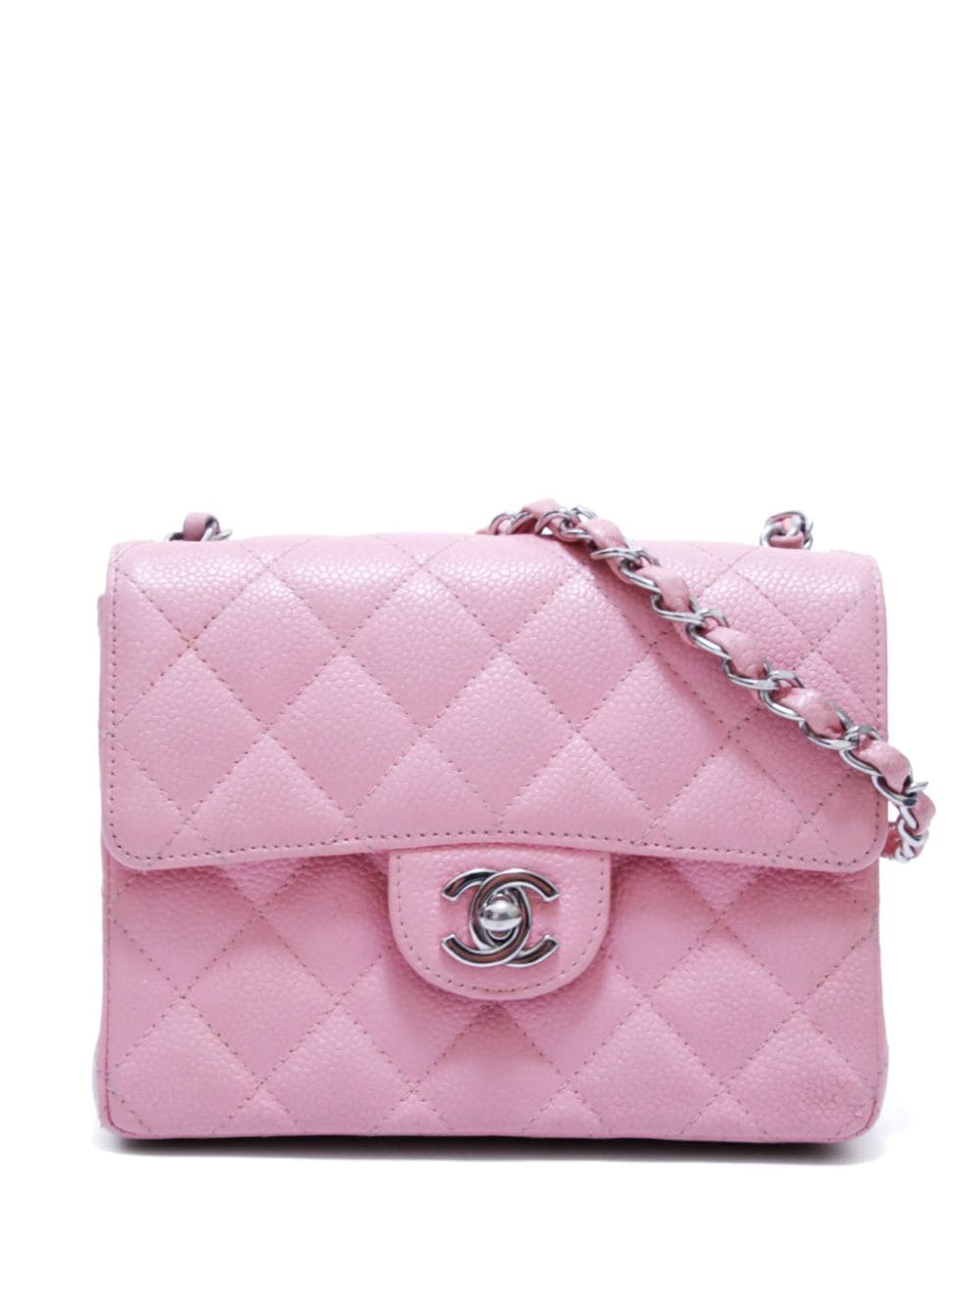 Chanel Pre-owned 1990s Mini Square Classic Flap Shoulder Bag